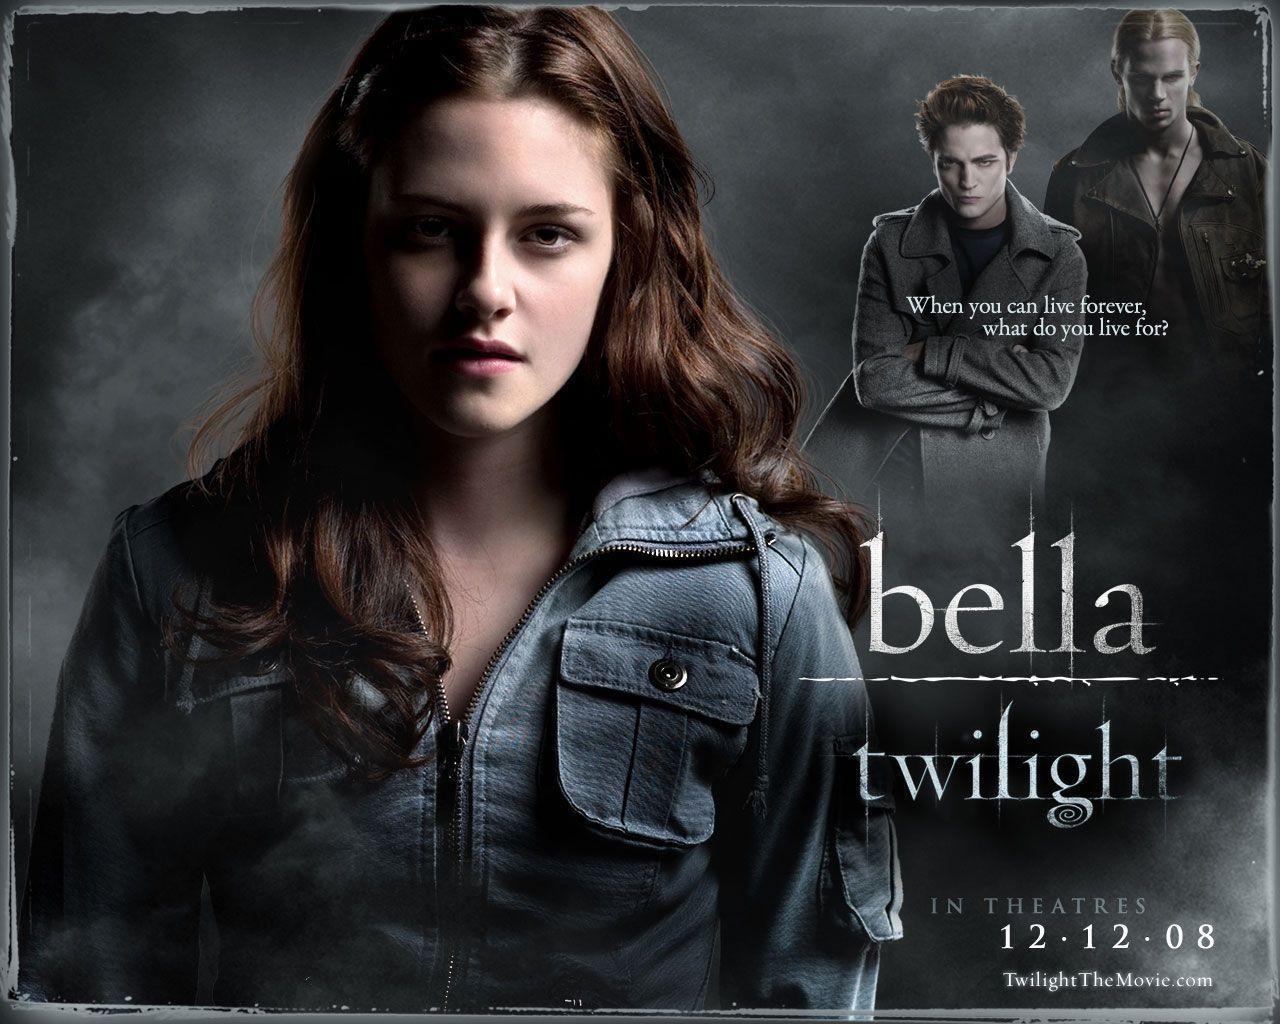 Photos and Image: Twilight wallpaper for desktop background